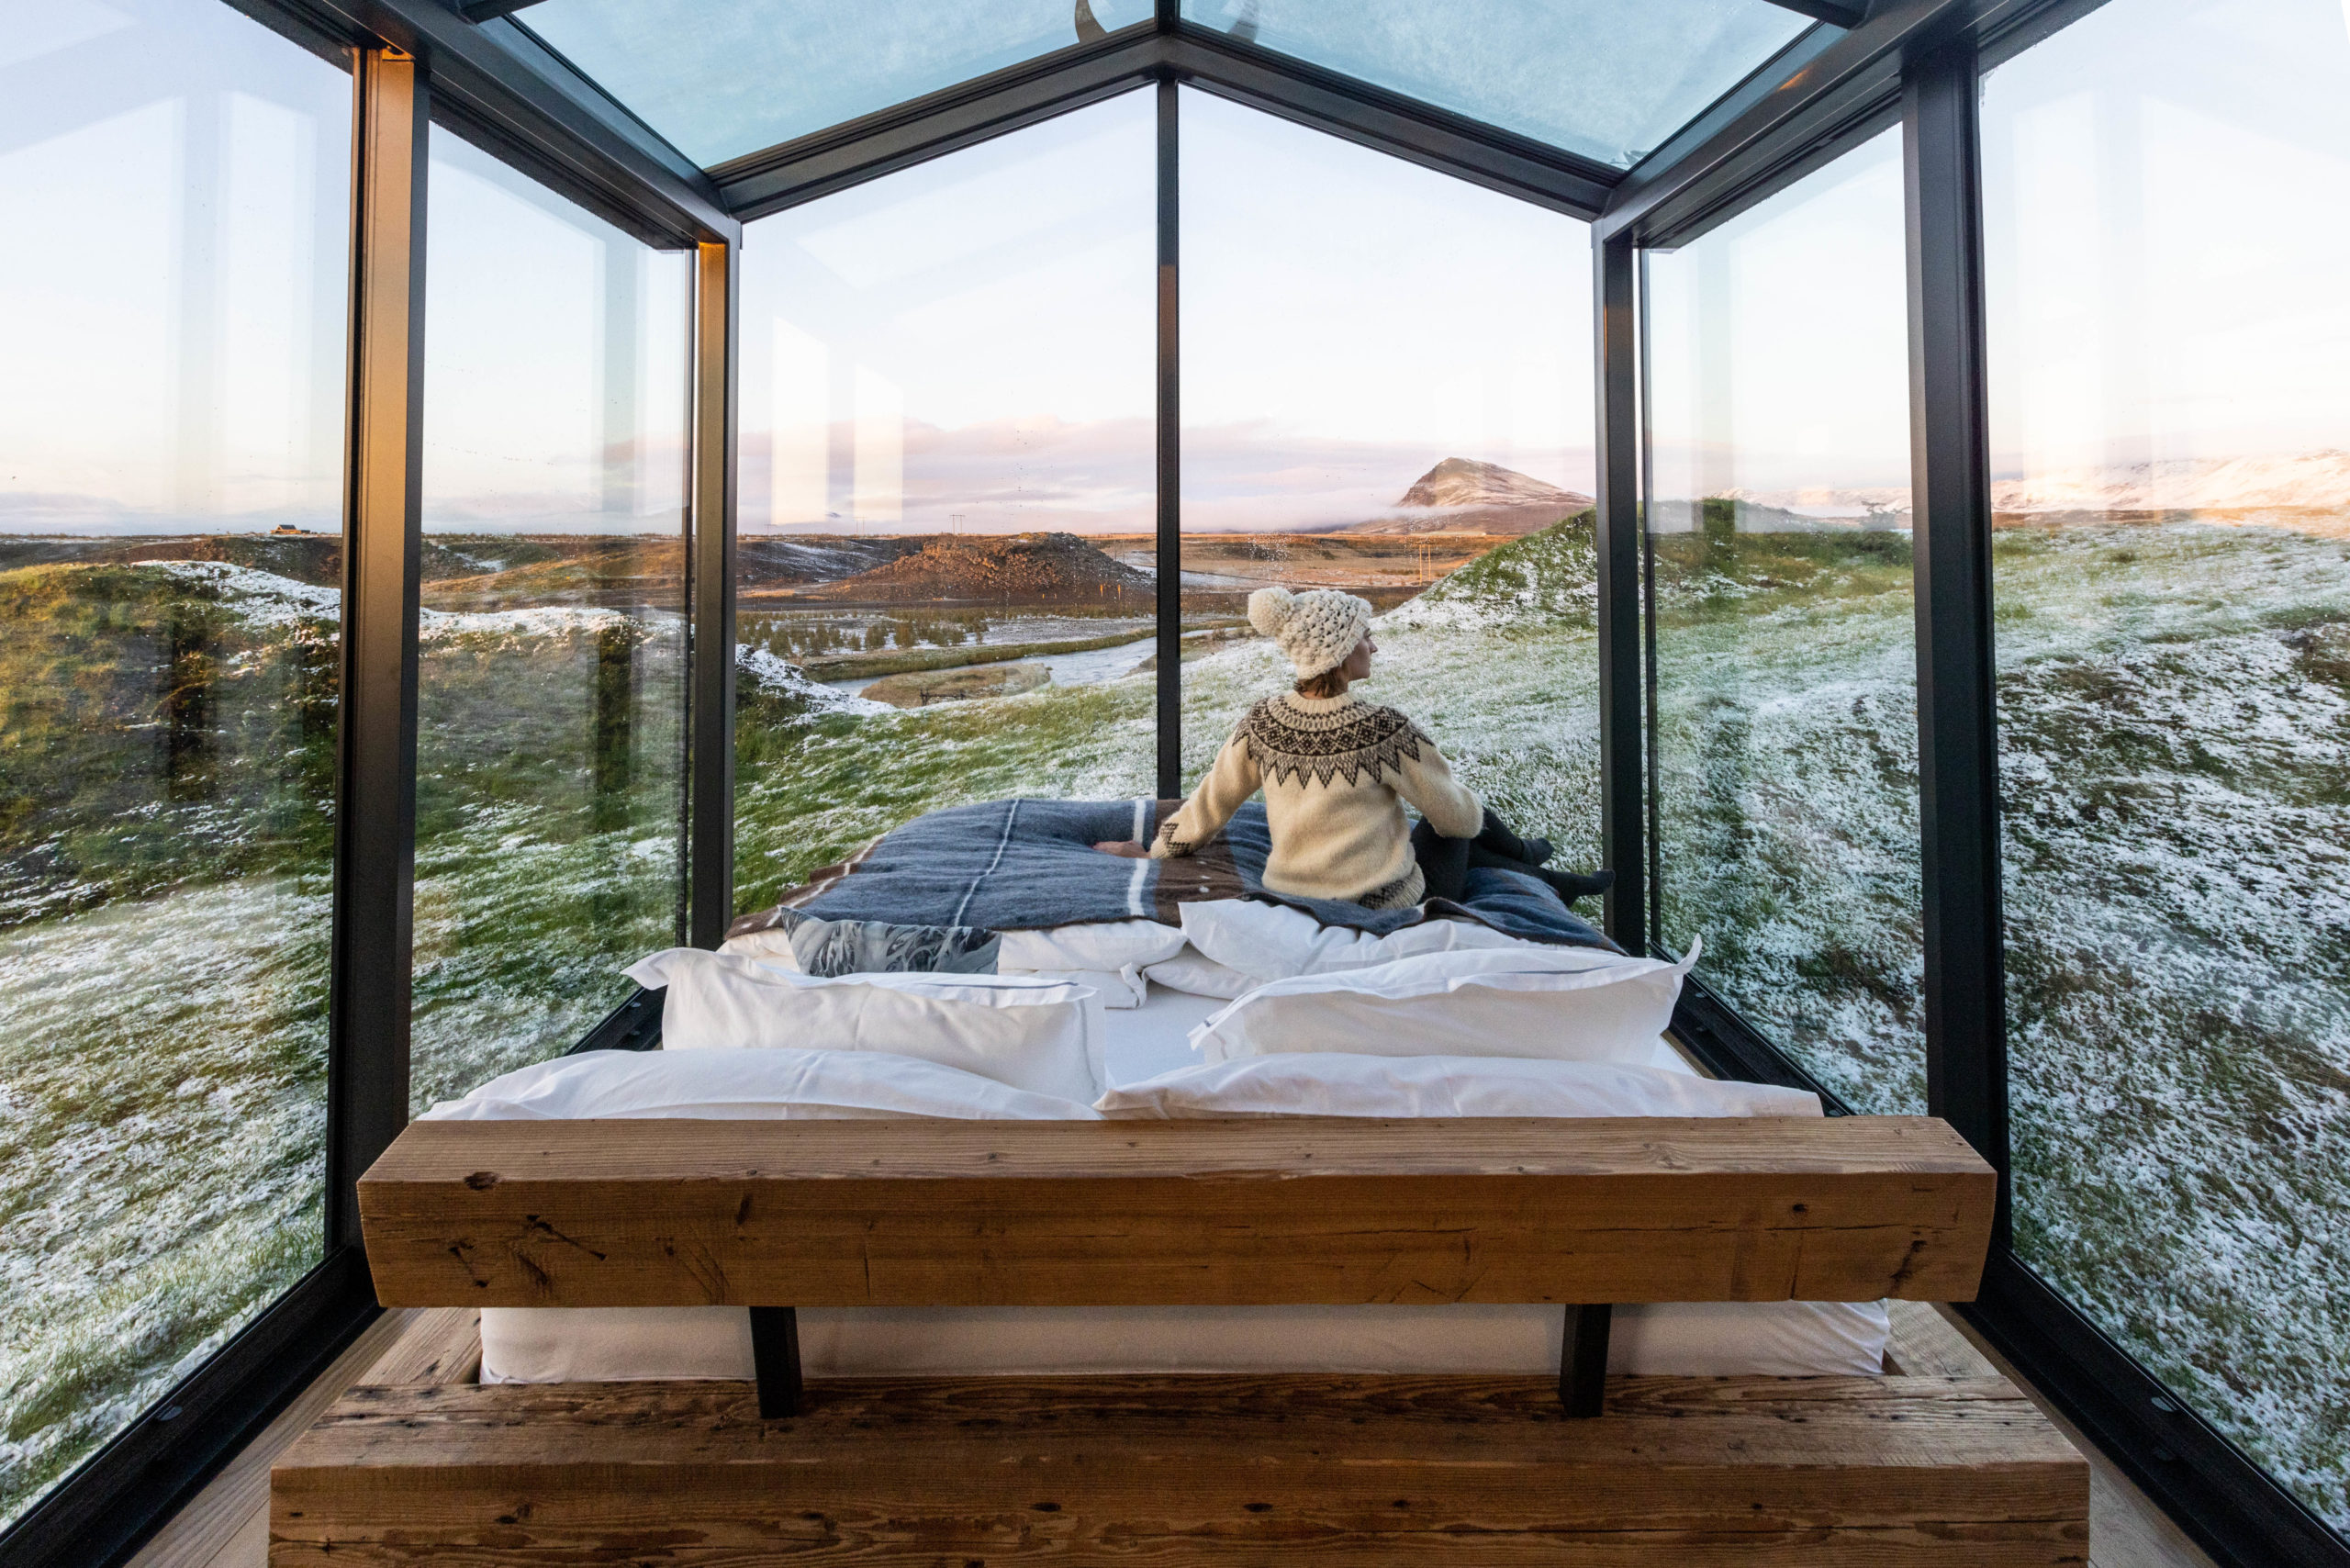 Bedroom in the Odin Panorama Glass Lodge in Iceland.